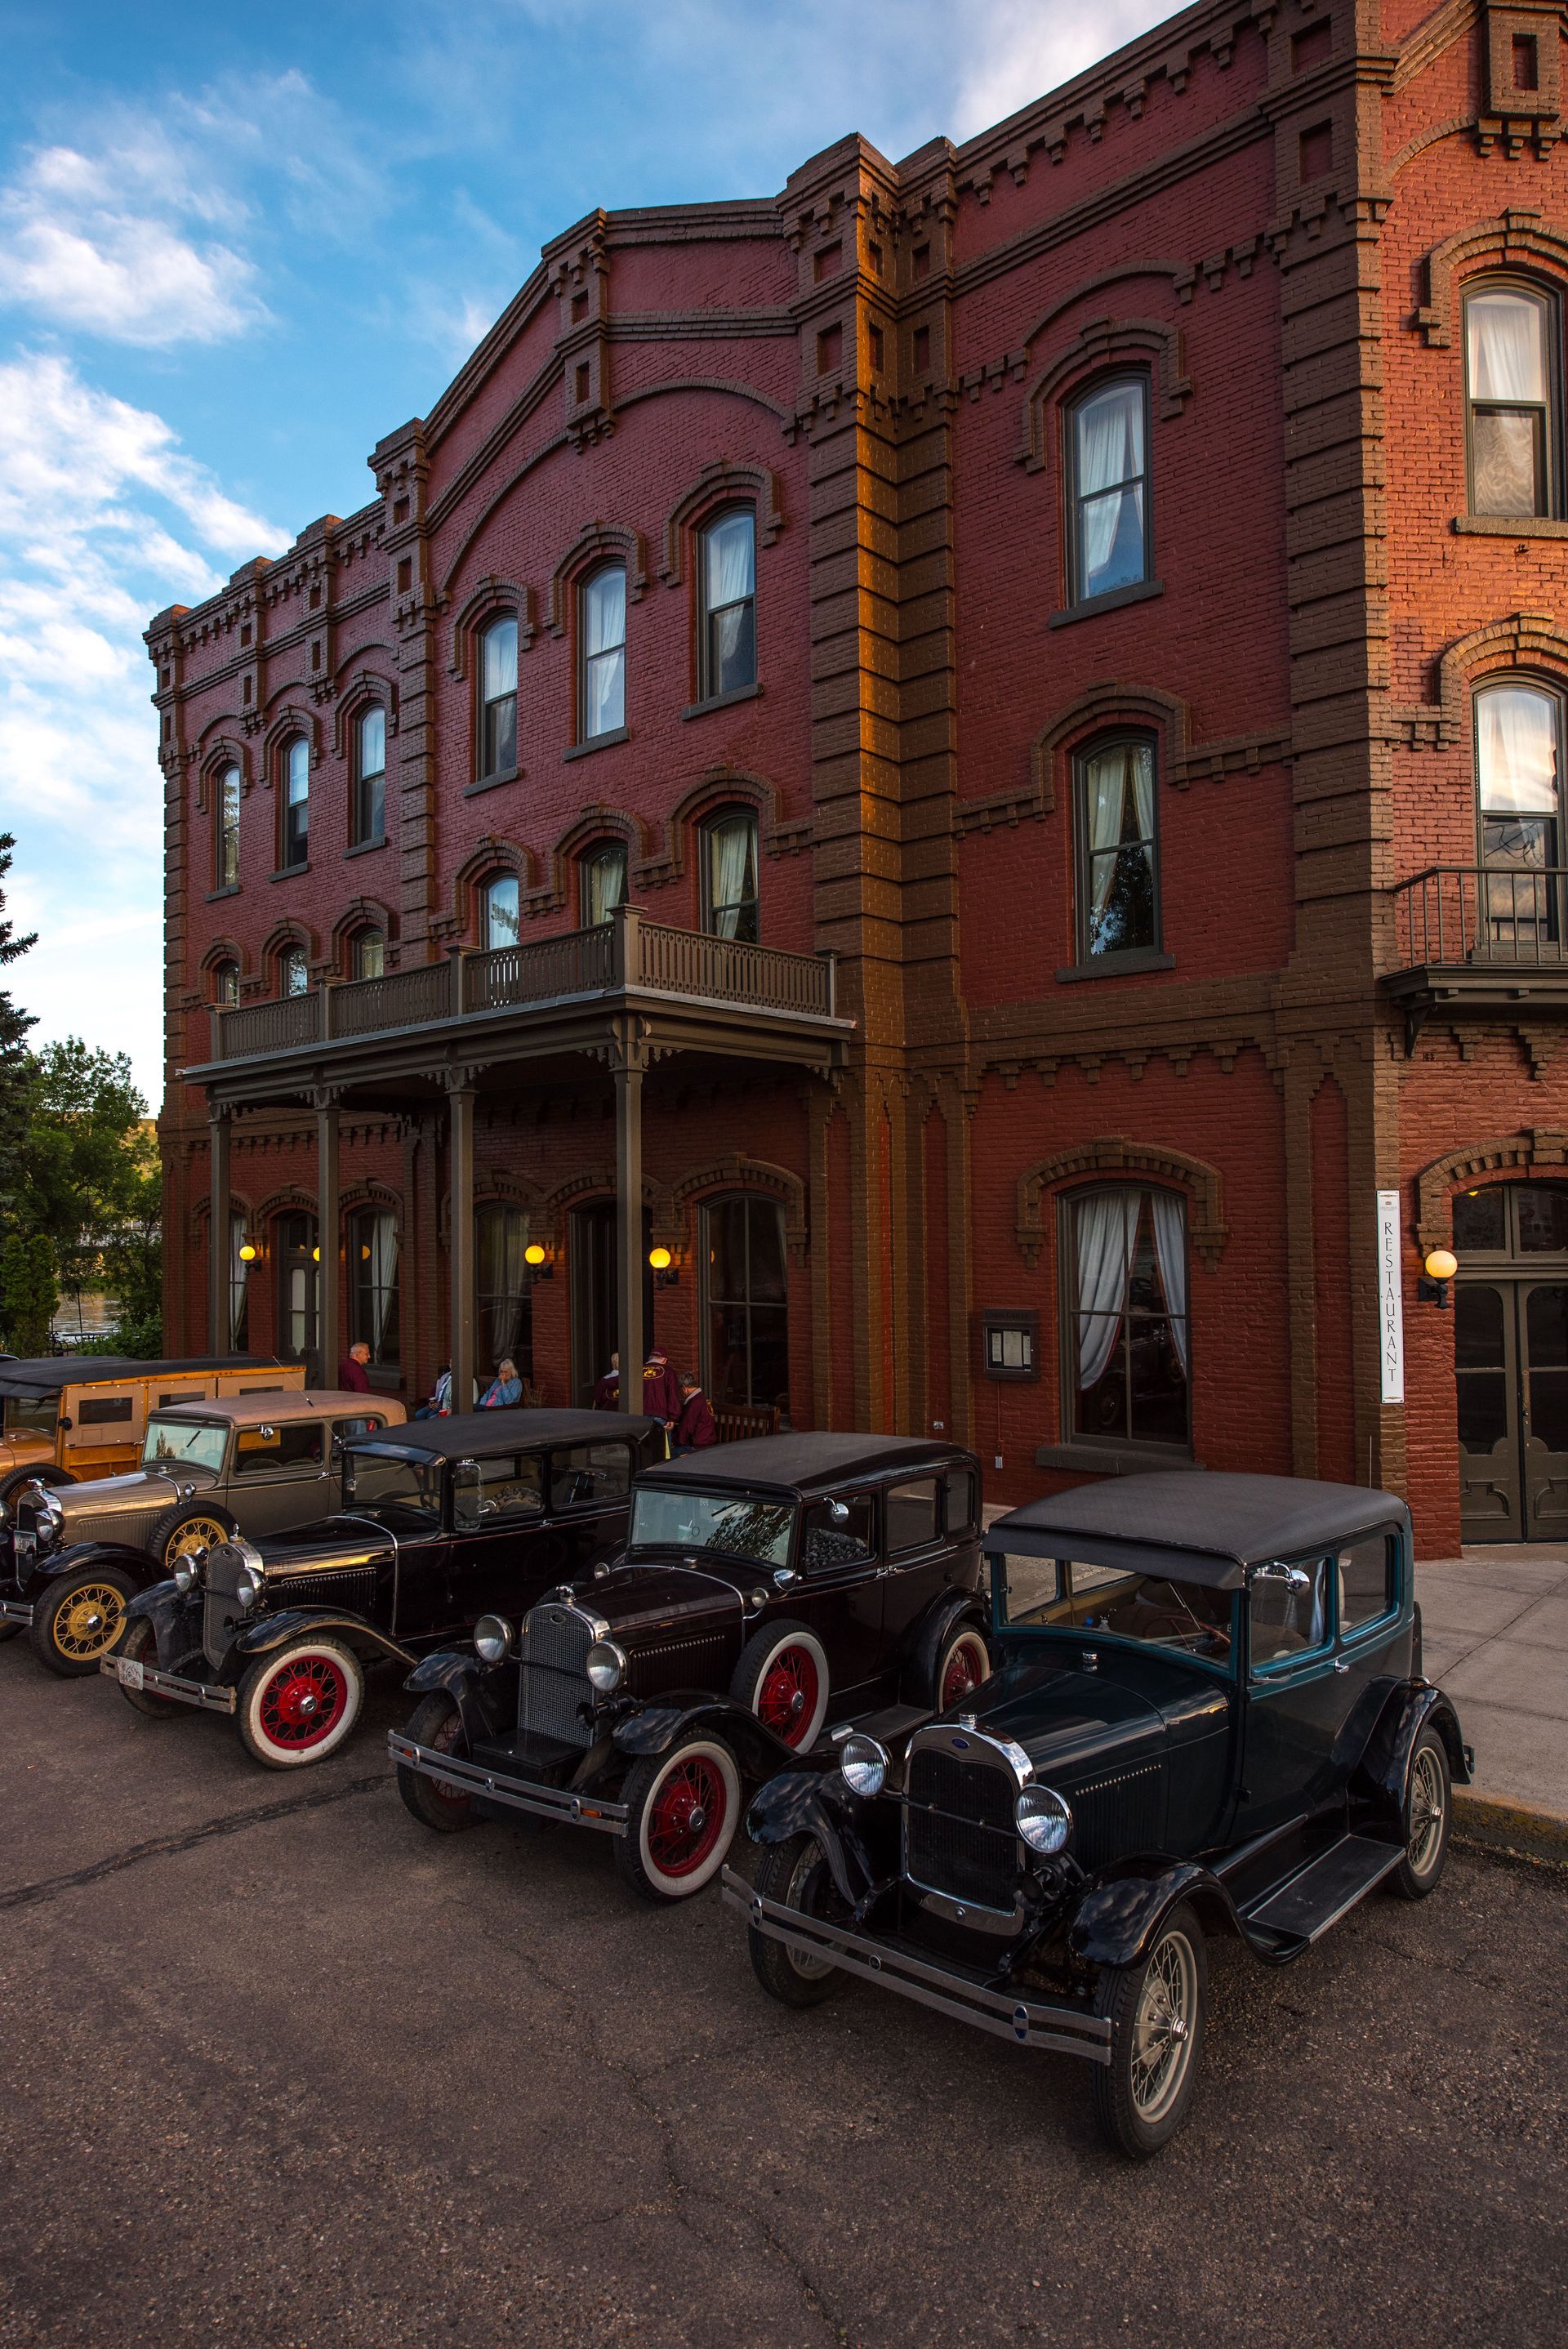 Three old cars are parked in front of a brick building.